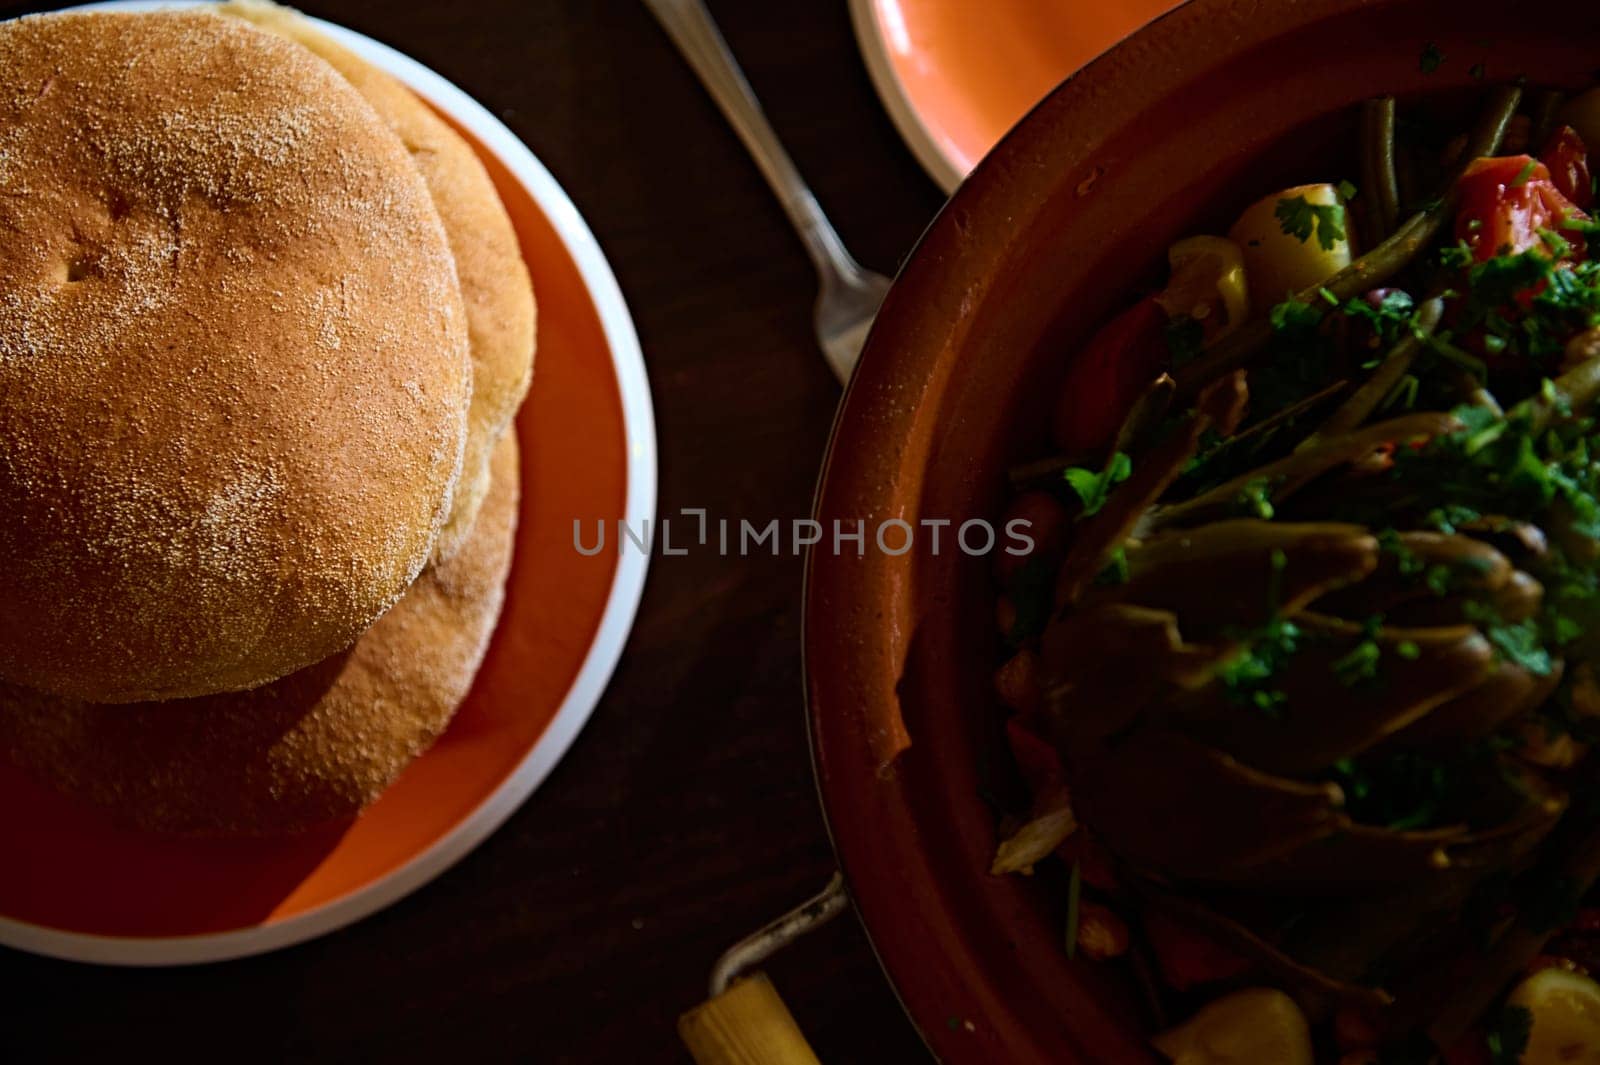 Top view of fresh baked wholegrain bread and tagine with steamed veggies on a wooden table. Close-up food photography for advertising and food blogs. Moroccan culinary, culture and traditional recipe